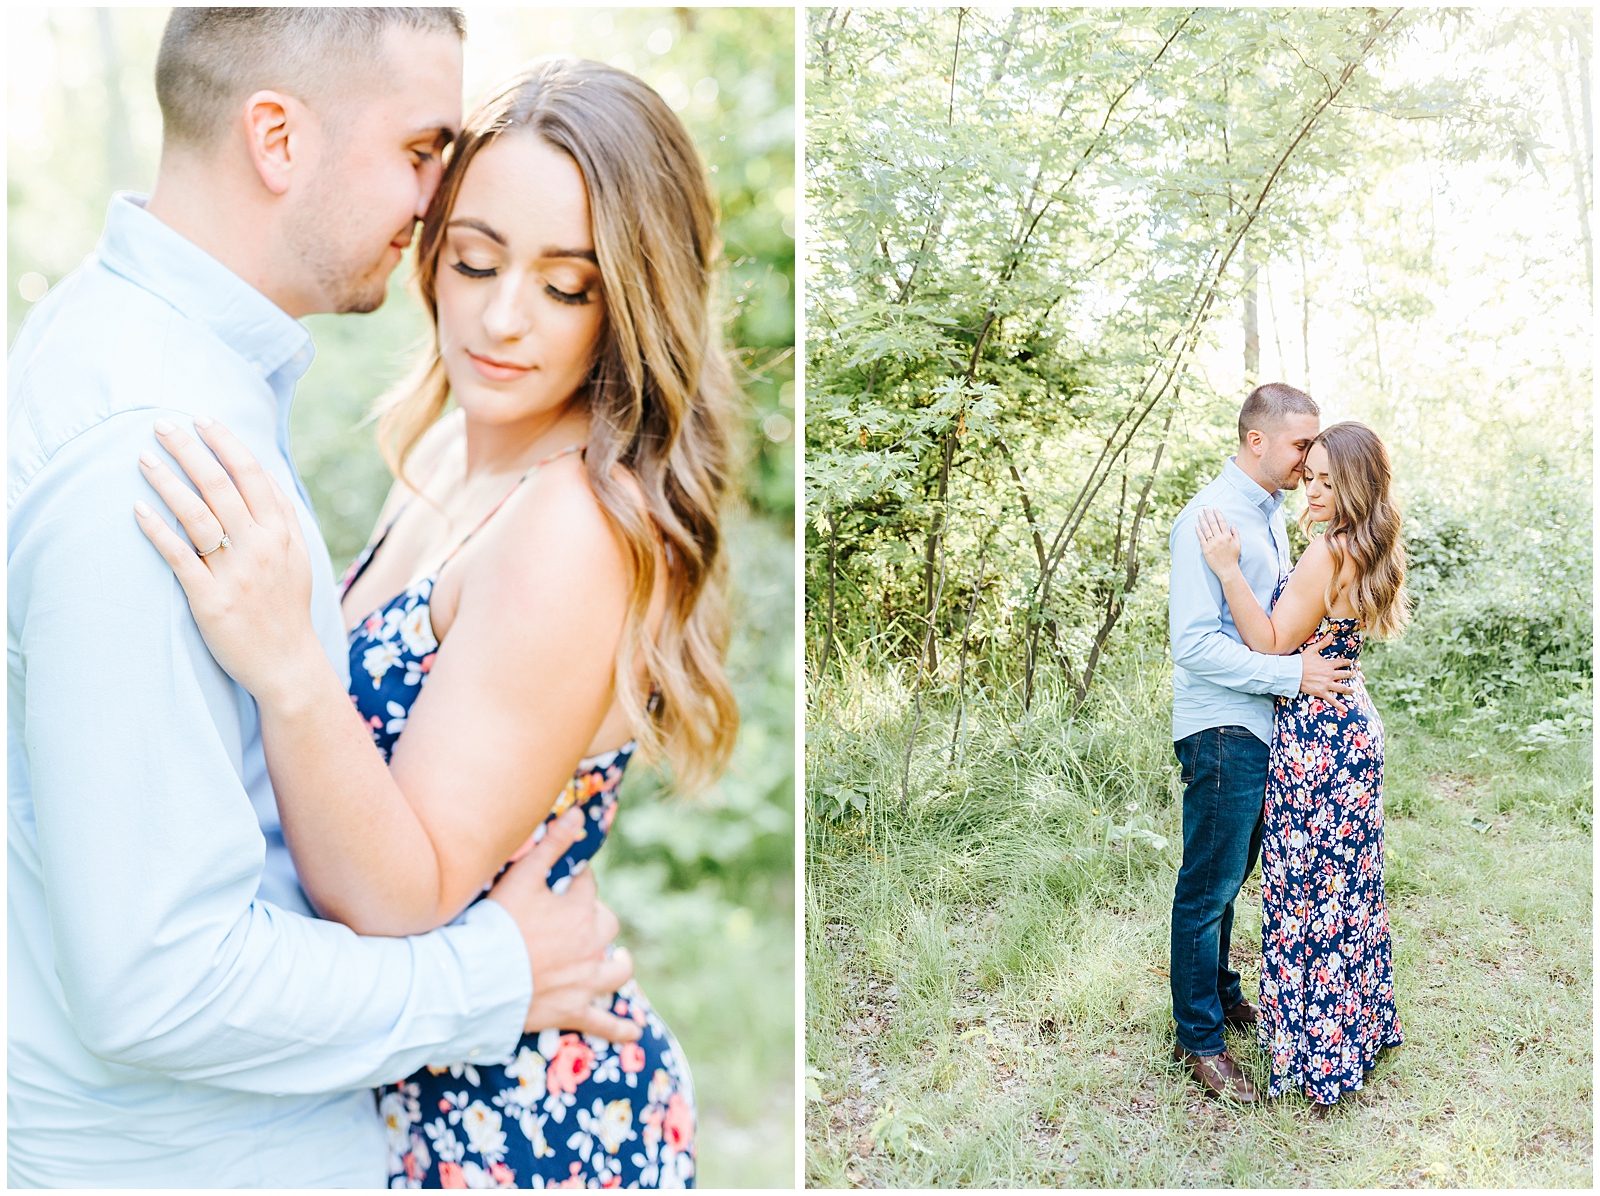 Dreamy, Romantic Light and Airy Spring Engagement Session on the Boise River